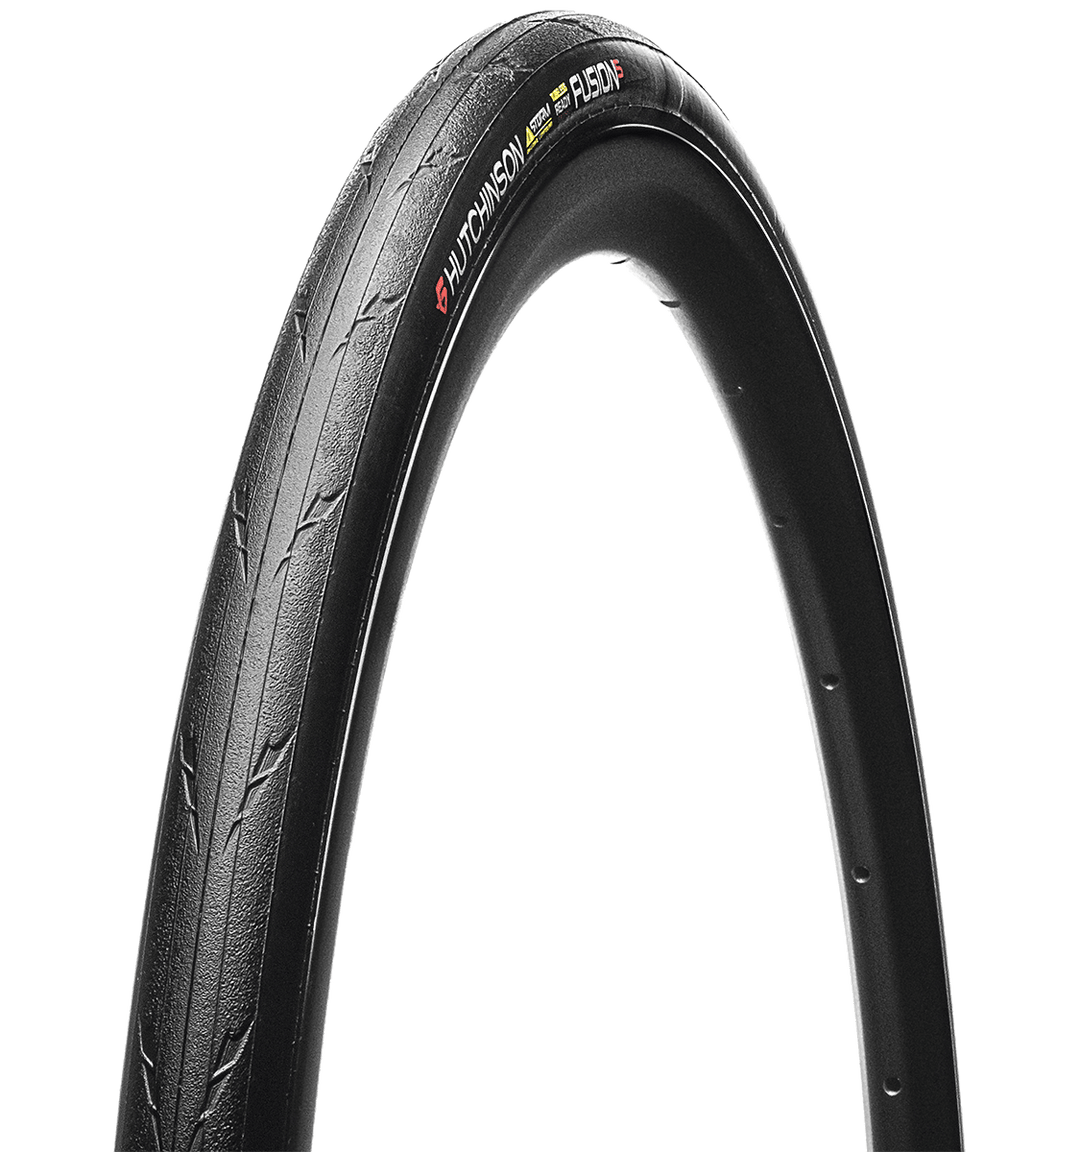 Hutchinson Fusion 5 Performance Tyres (2 Tyres)